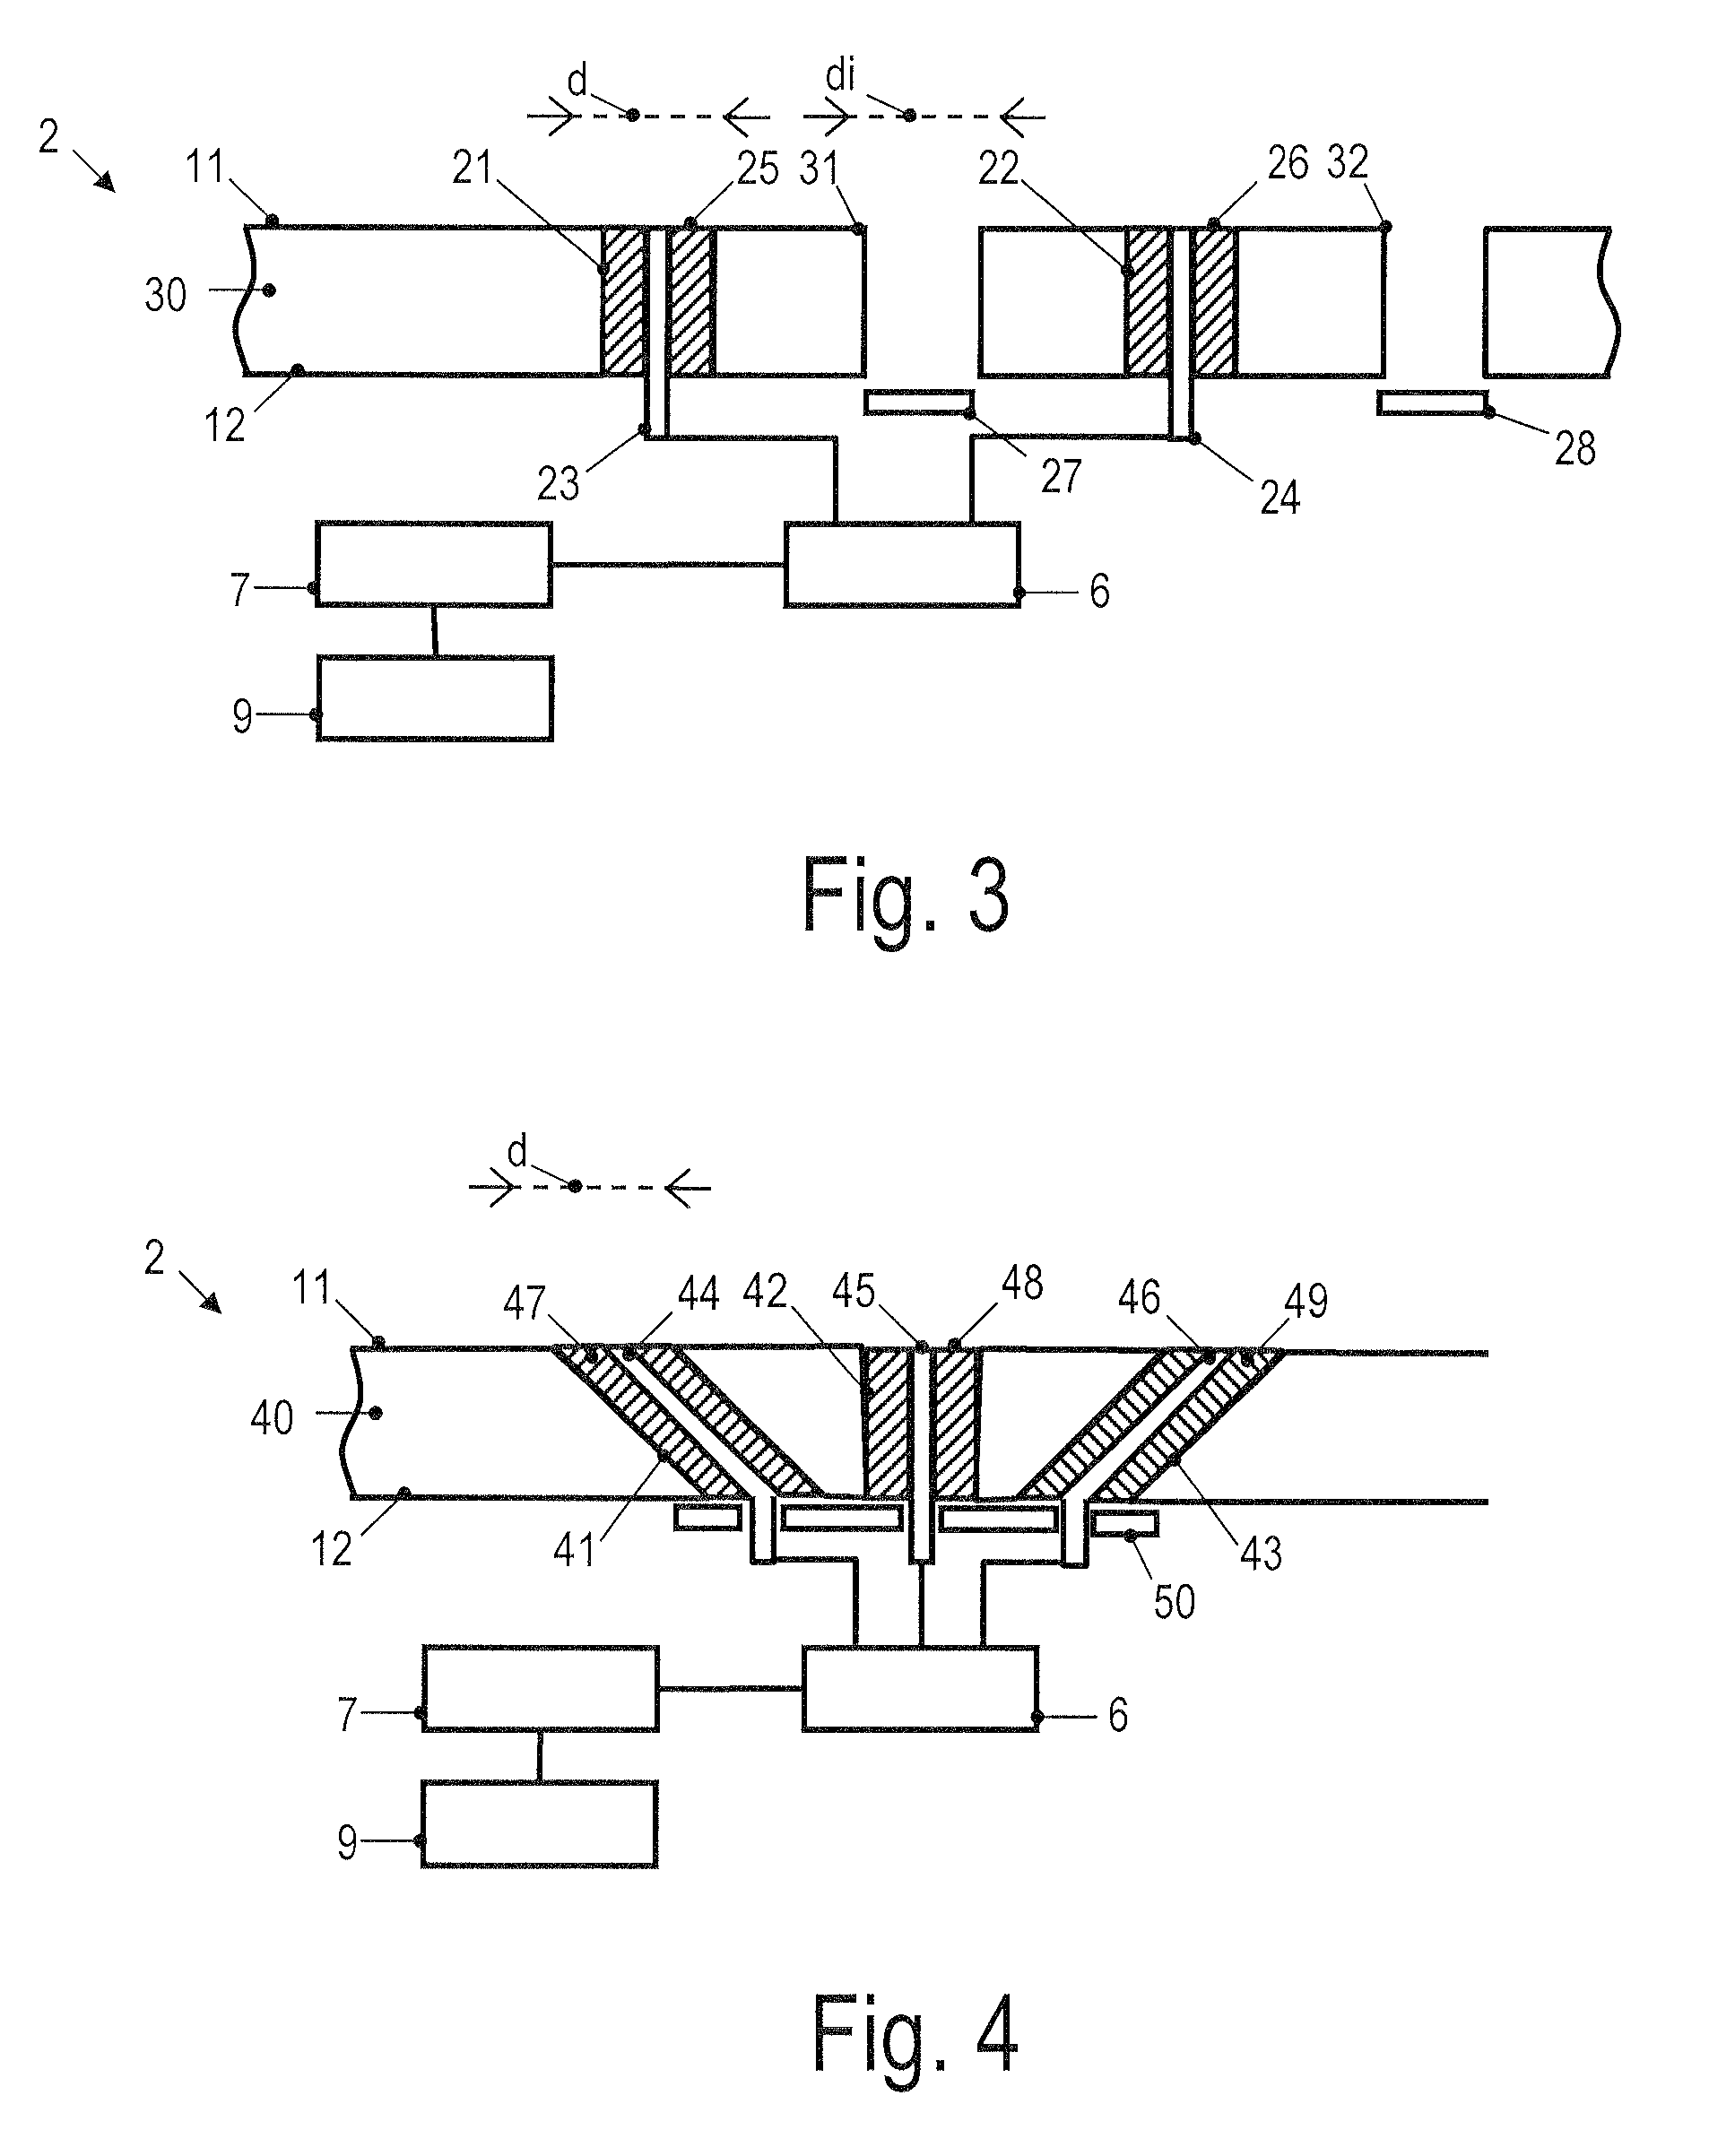 Electronic device having a hidden input key and method of manufacturing an electronic device